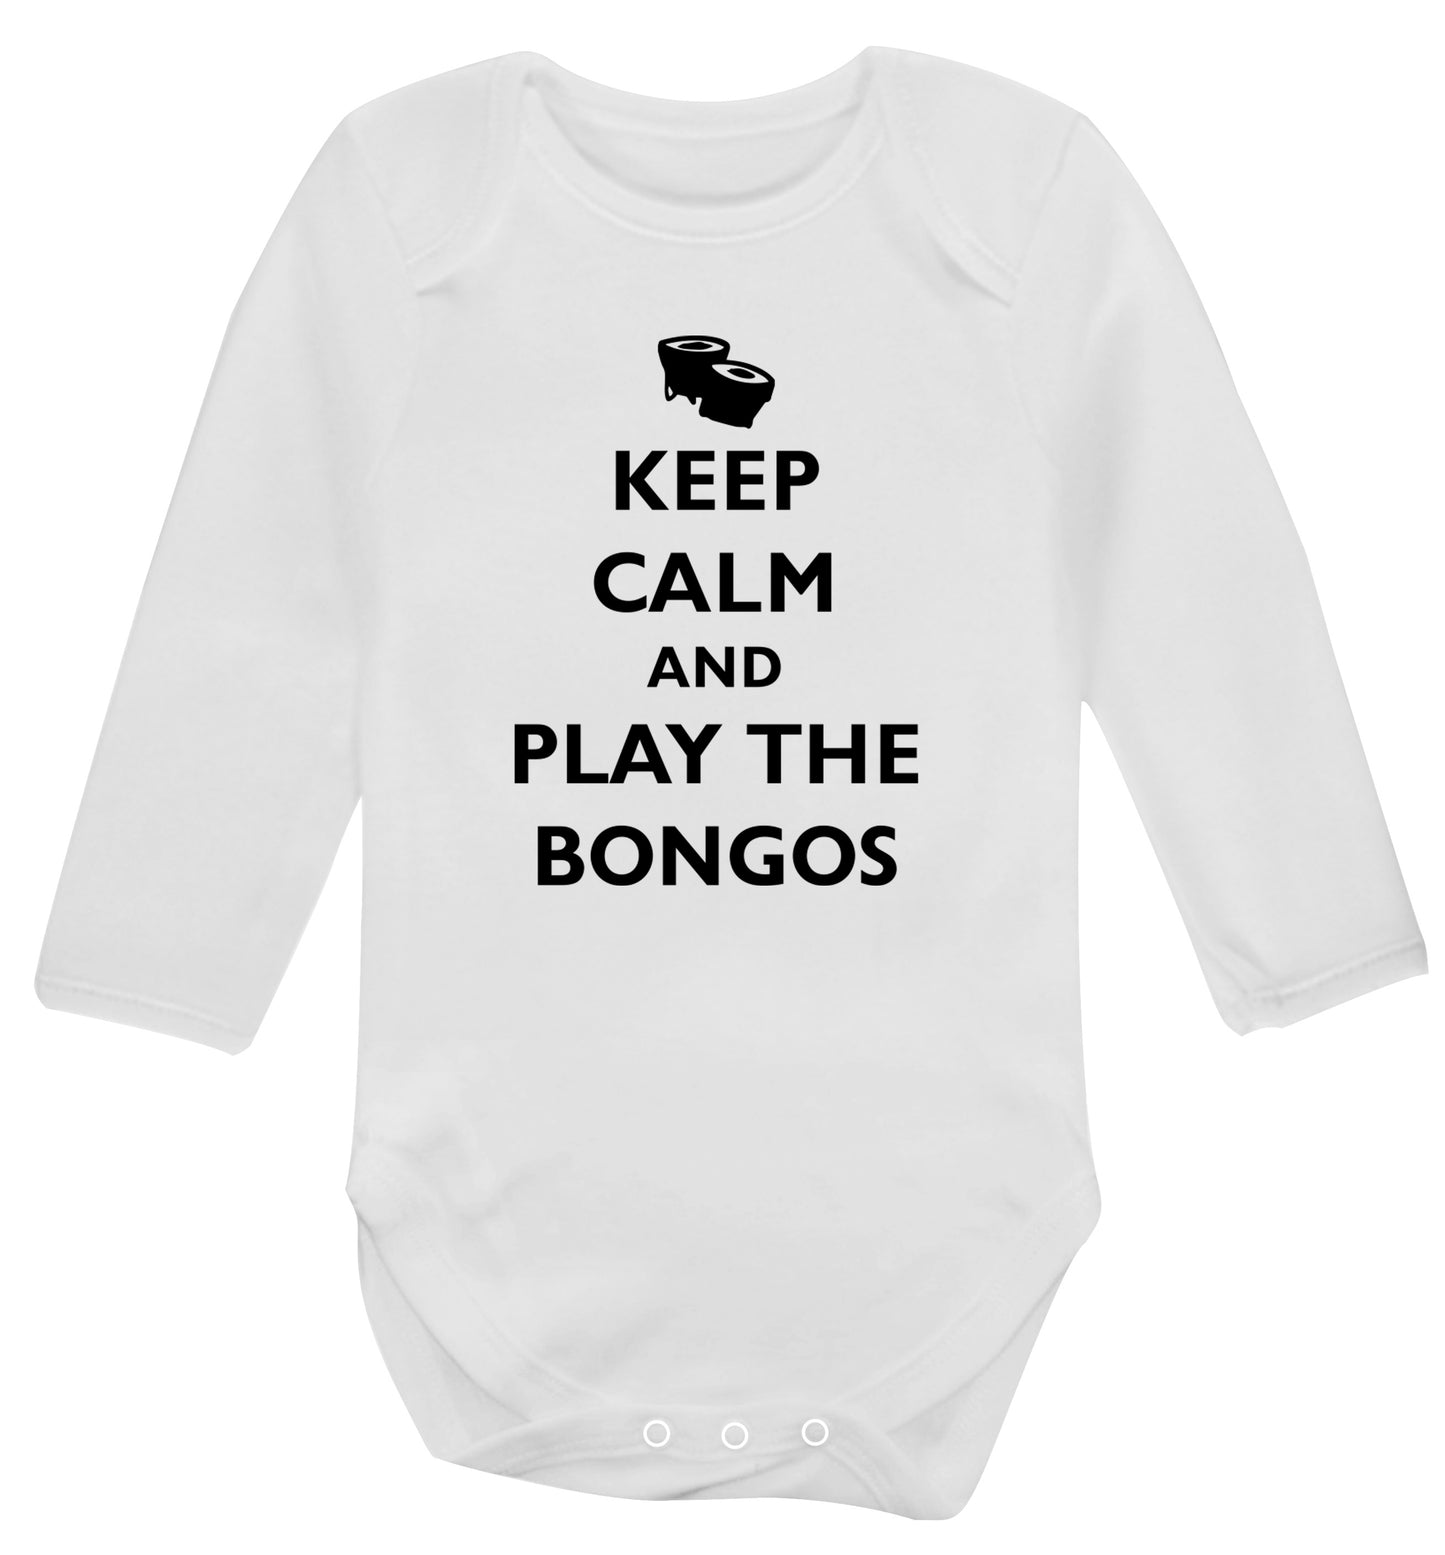 Keep calm and play the bongos Baby Vest long sleeved white 6-12 months